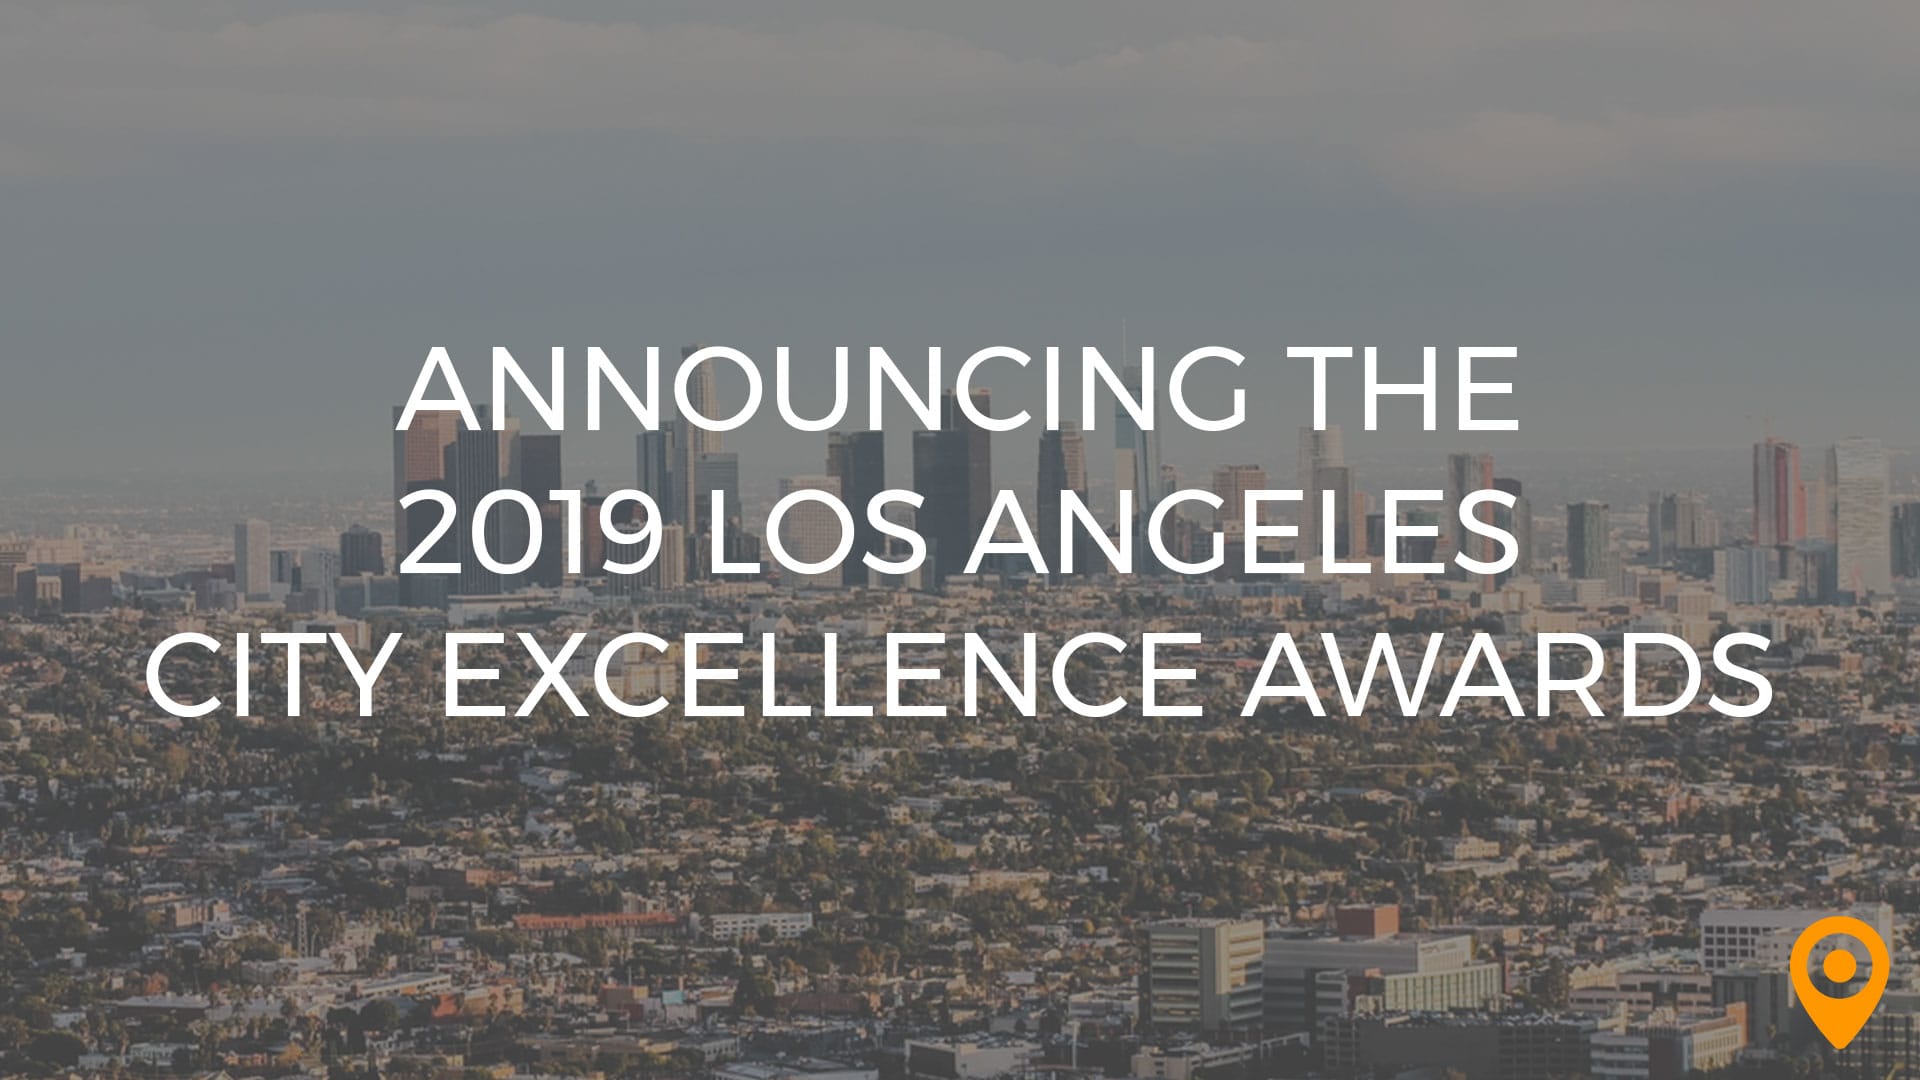 Sachs Marketing Group is a 2019 Los Angeles City Excellence Award Winner - Sachs Marketing Group